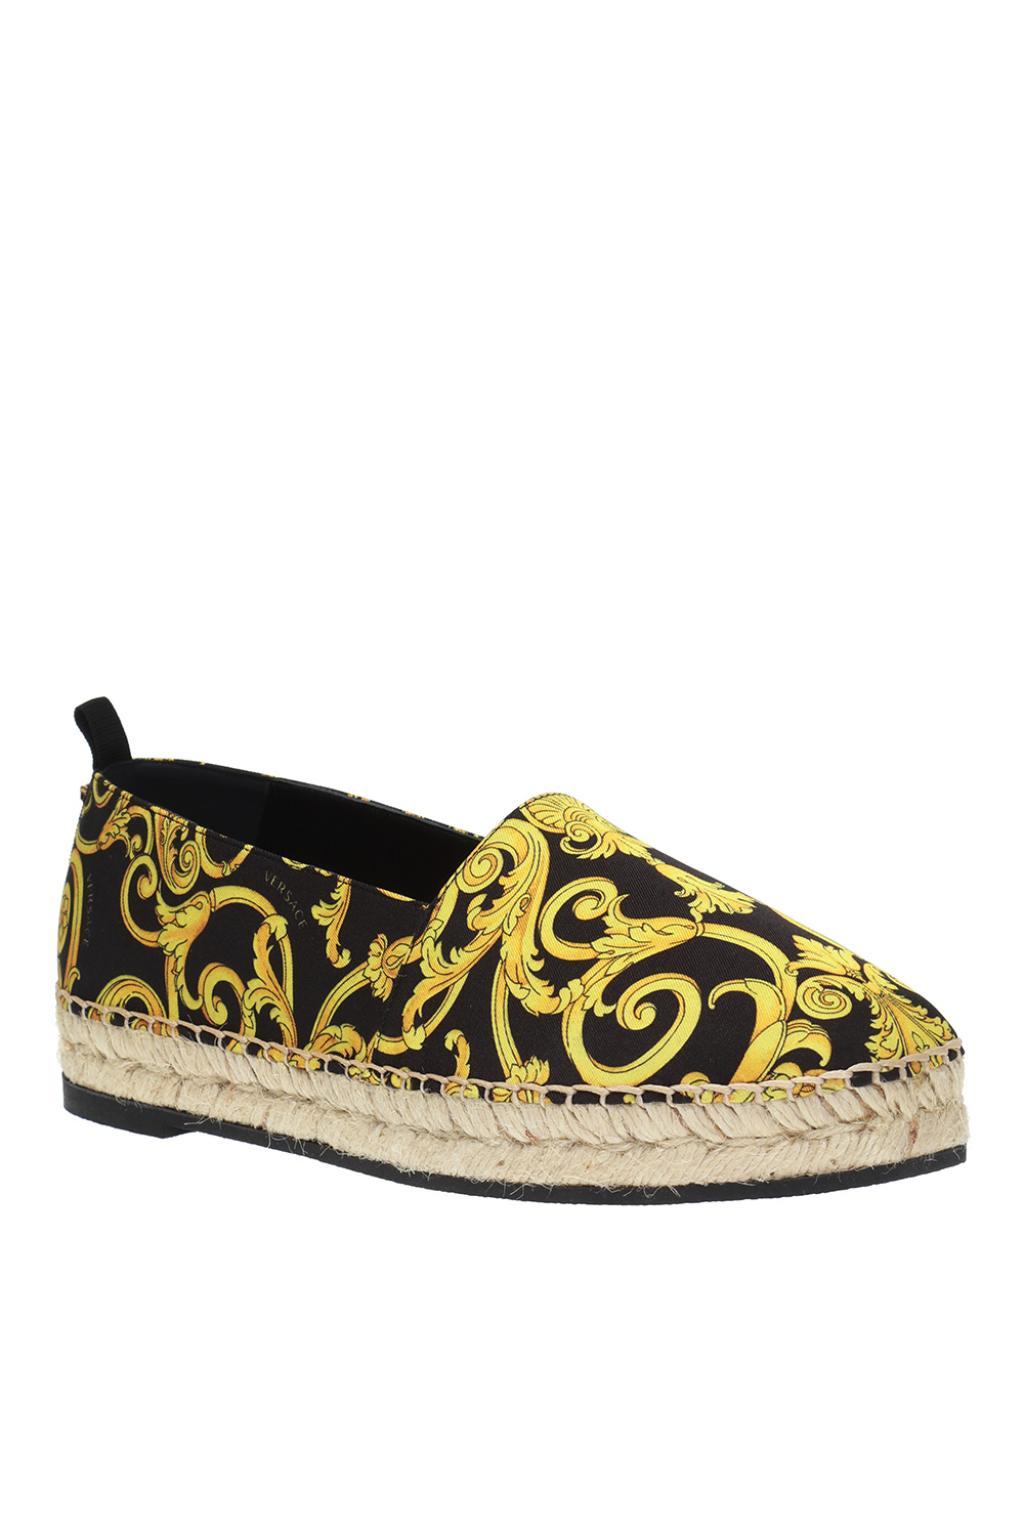 Versace Black And Yellow Tribute Leather Espadrilles - Save 61% - Lyst